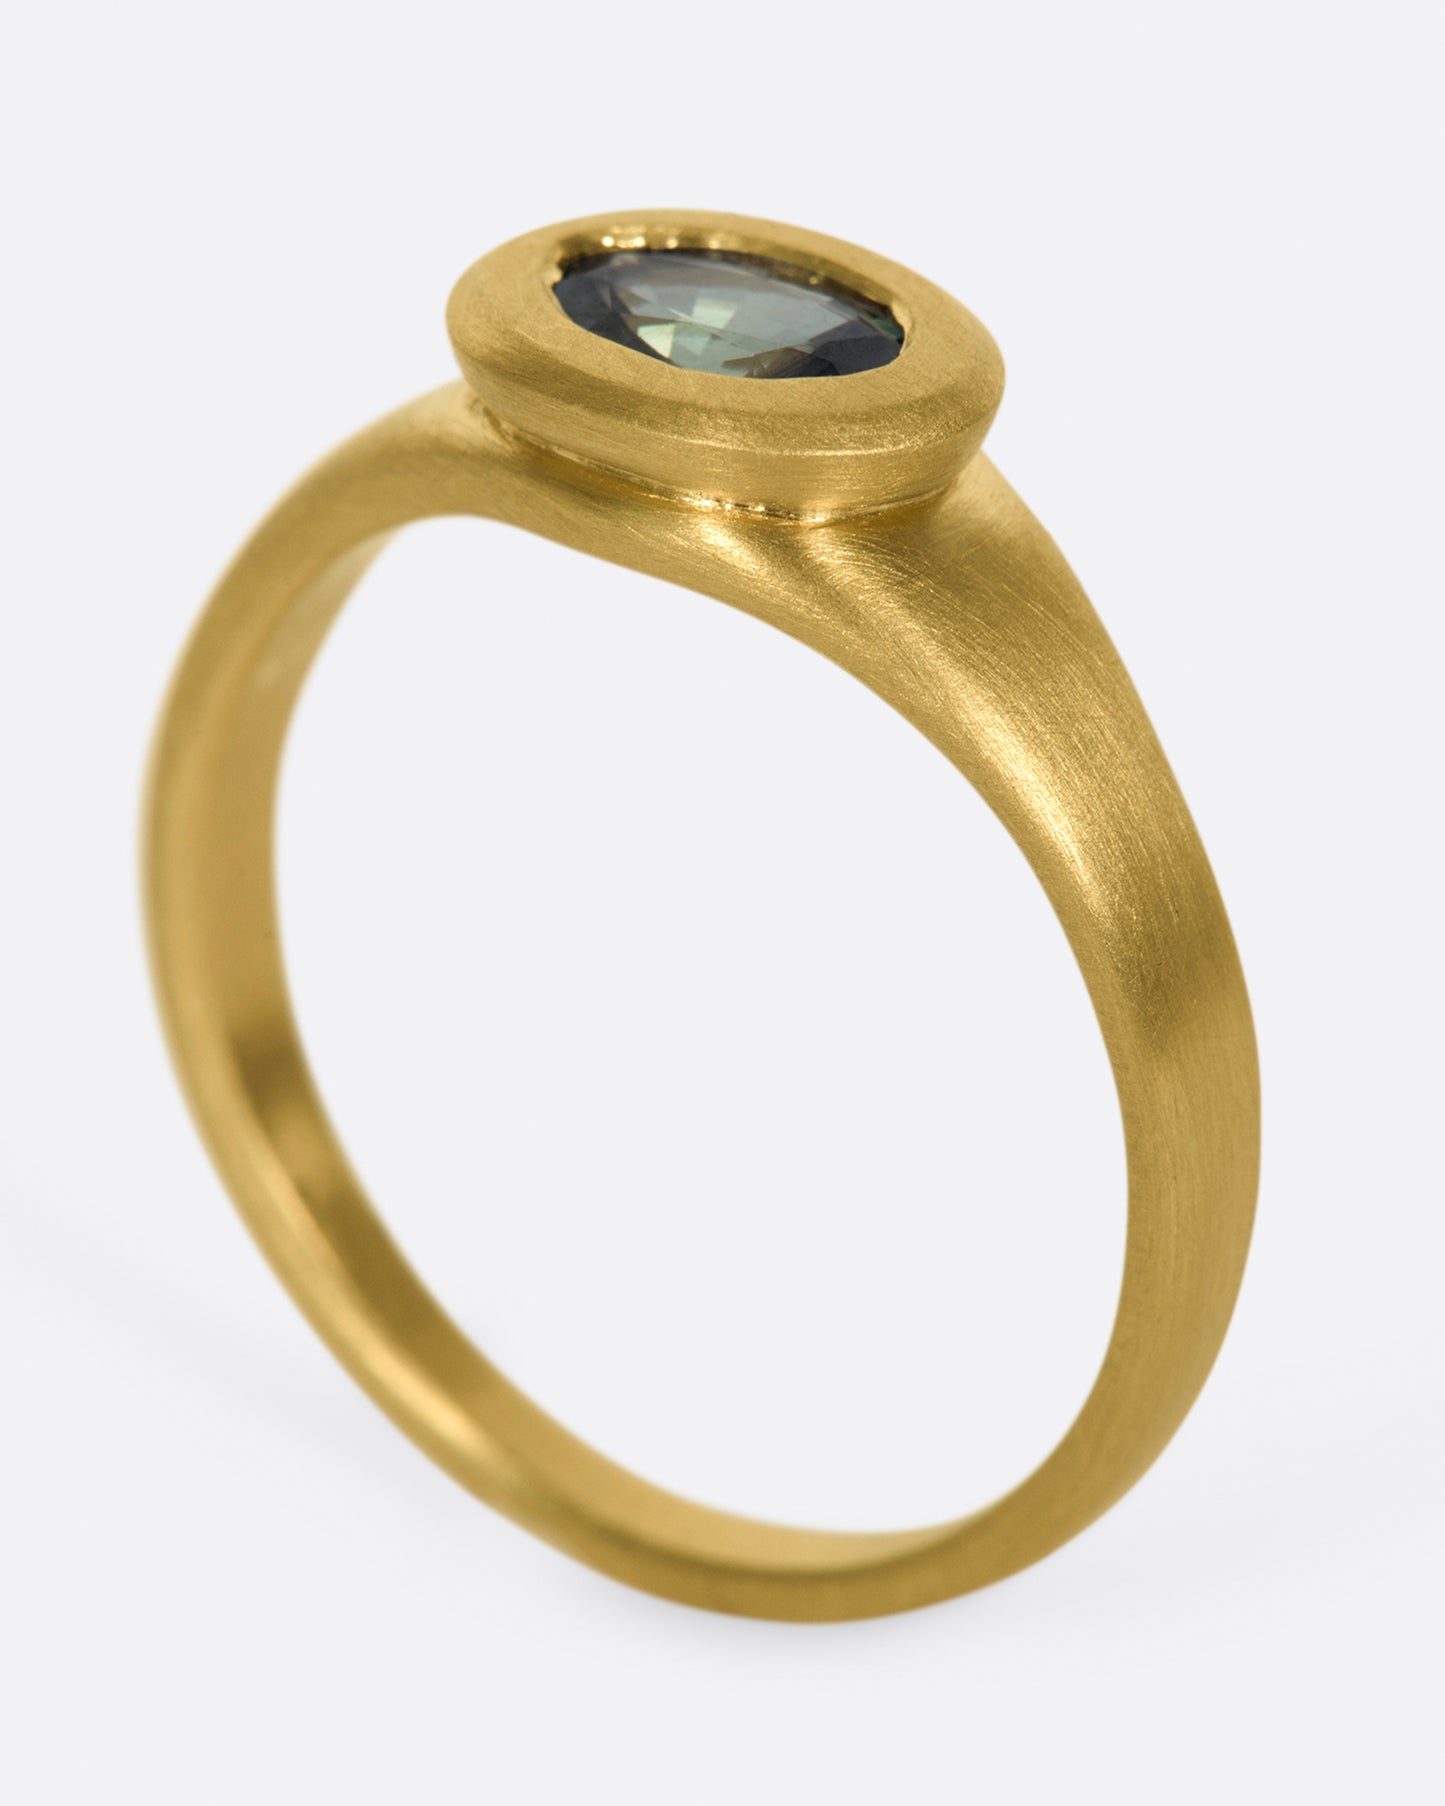 A one of a kind satin-finish gold ring with an oval blue-green Parti sapphire at its center.